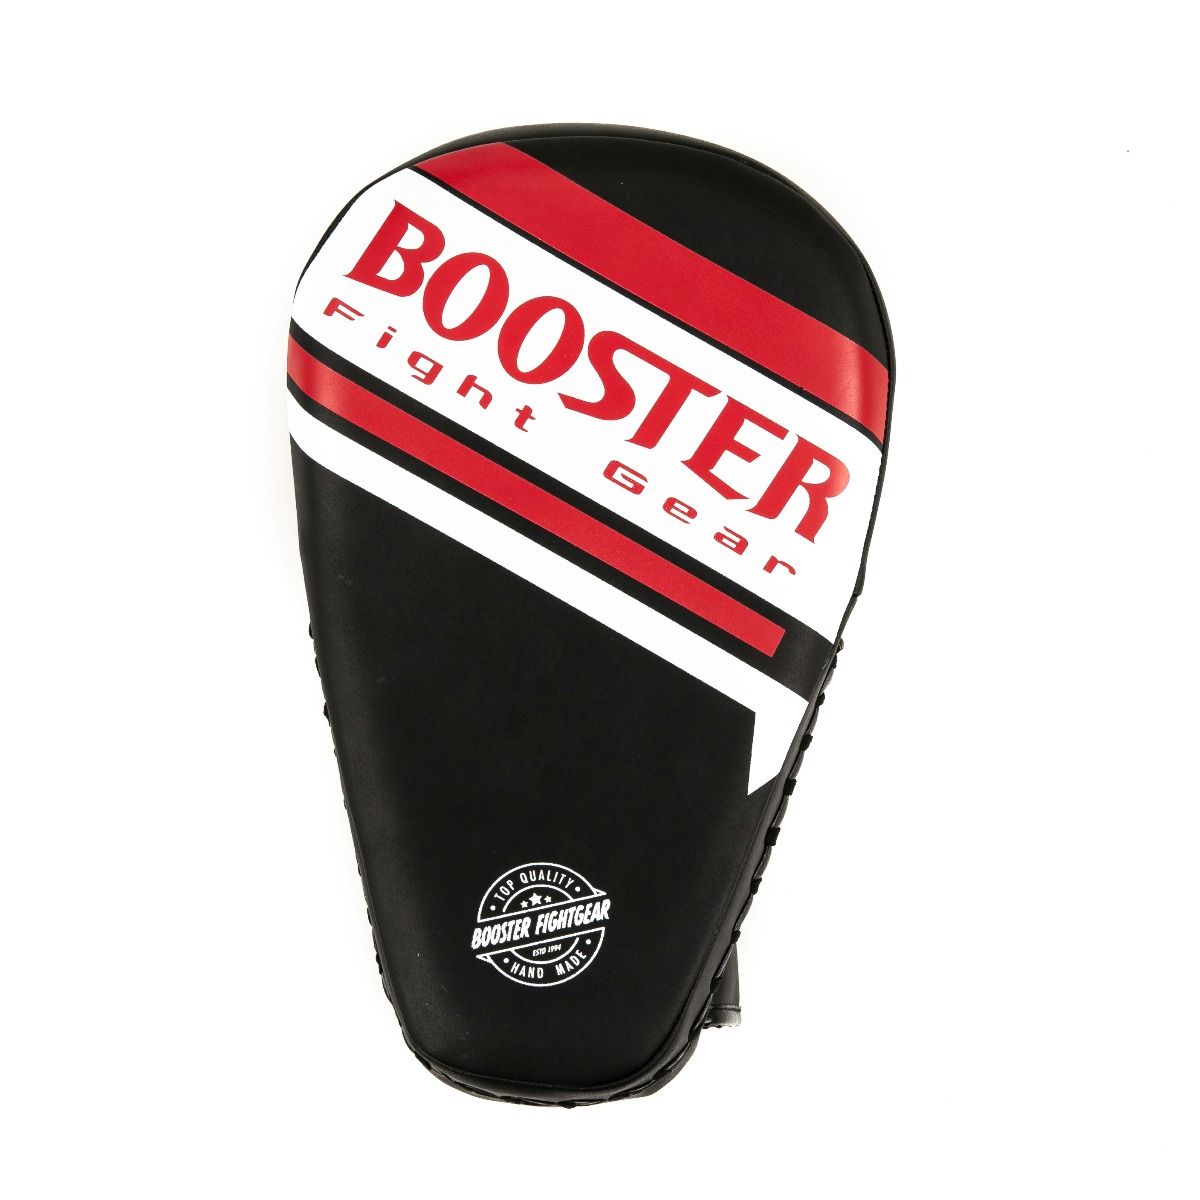 Booster PML BC 5